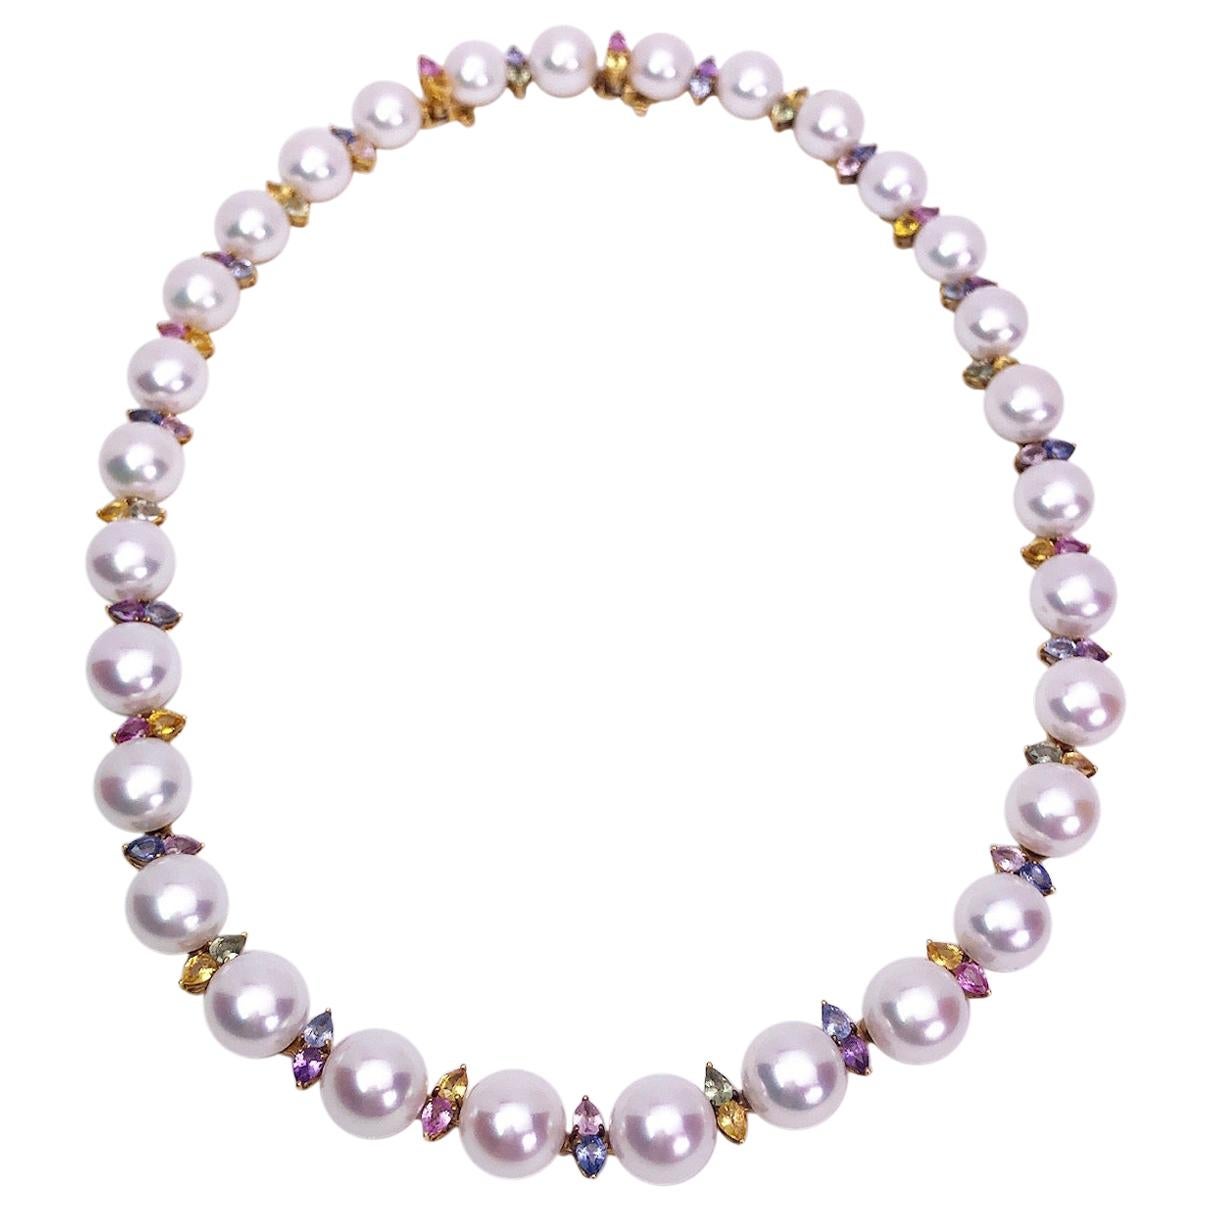 Schoeffel 18K Gold Freshwater Pearl Necklace with Multicolored Pear Sapphires